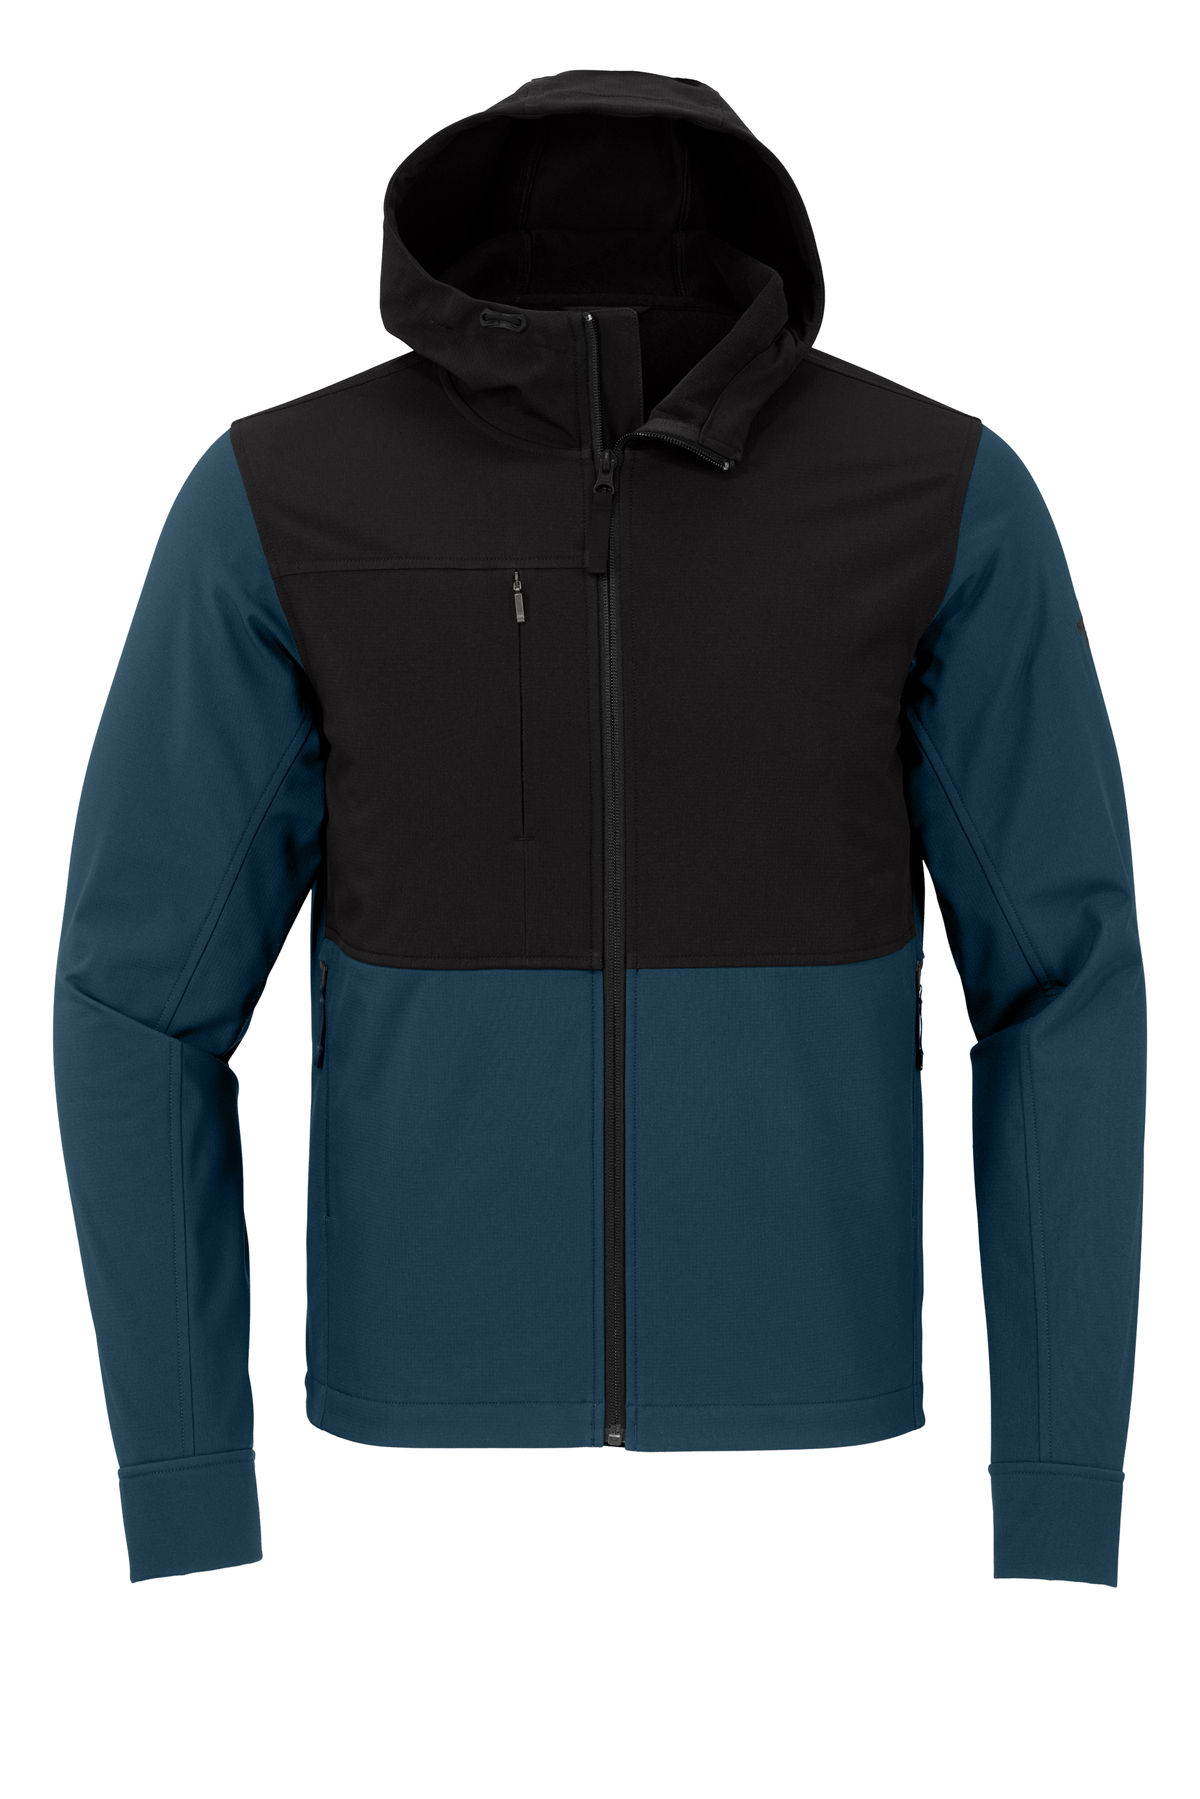 BRADOR WATERPRROOF WINDPROOF SHELL JACKET WITH HOOD 520P Details about  / L